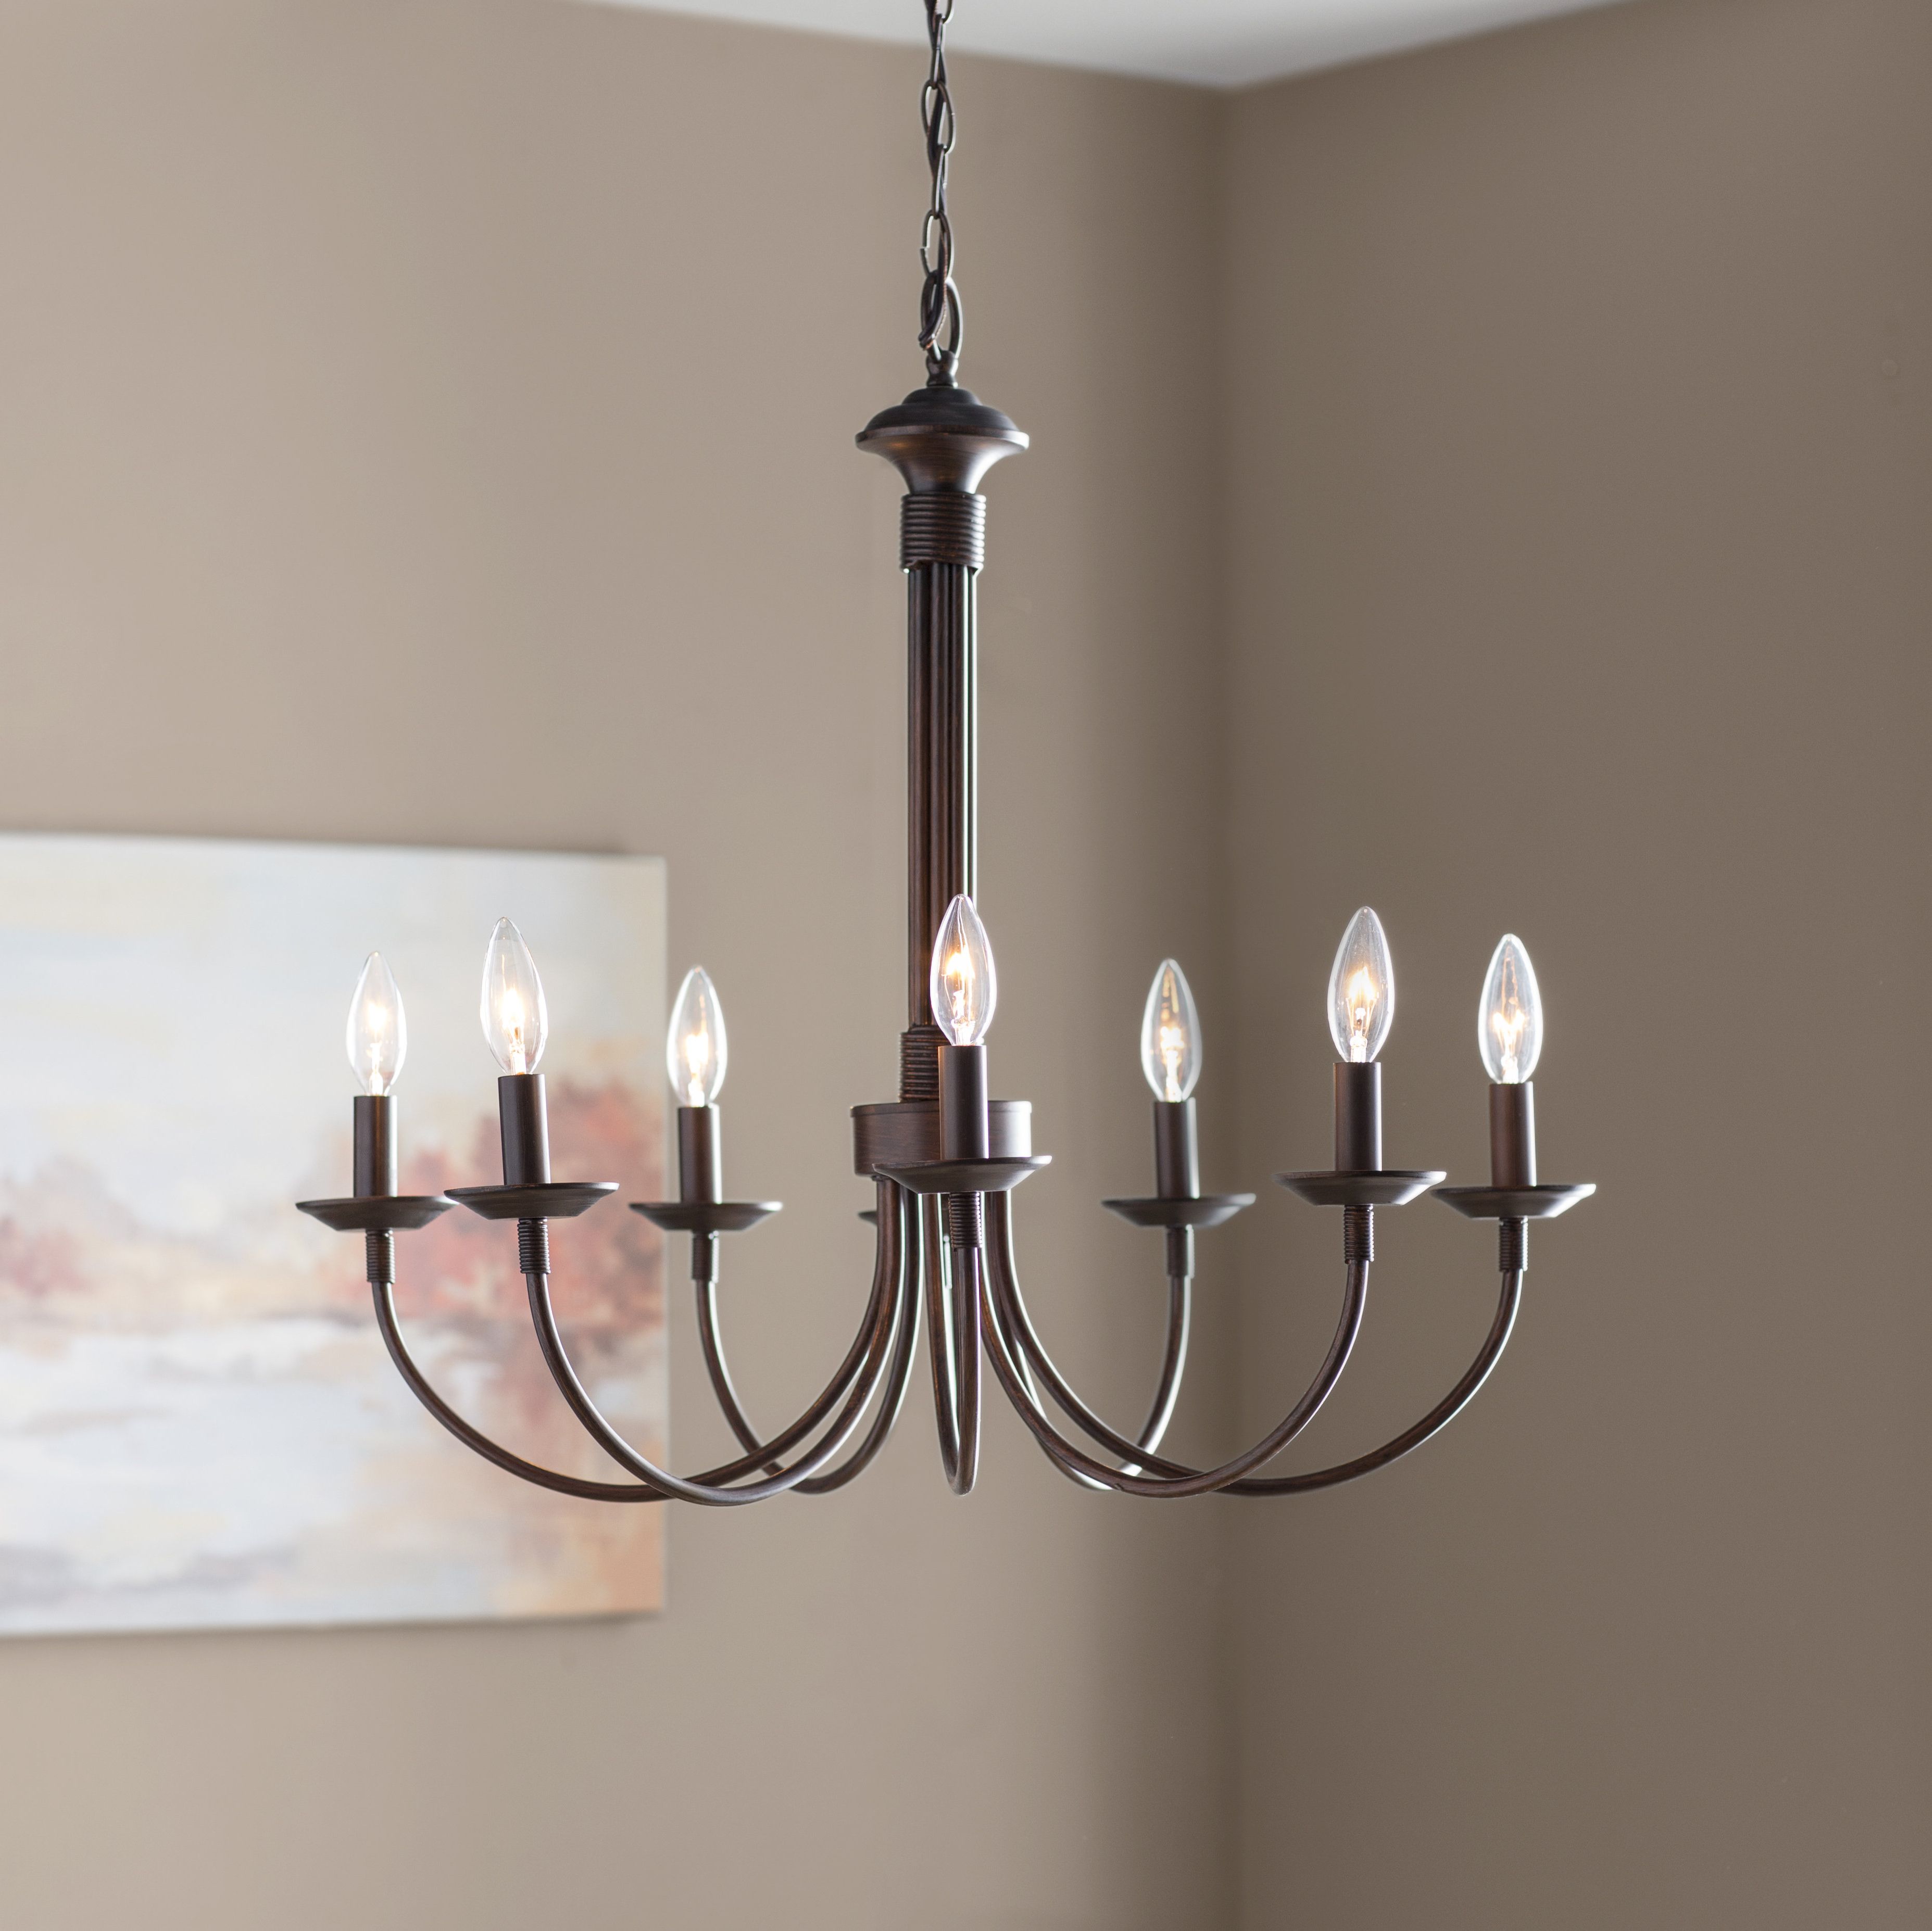 Most Recently Released Shaylee 8 Light Candle Style Chandelier In Giverny 9 Light Candle Style Chandeliers (View 17 of 25)